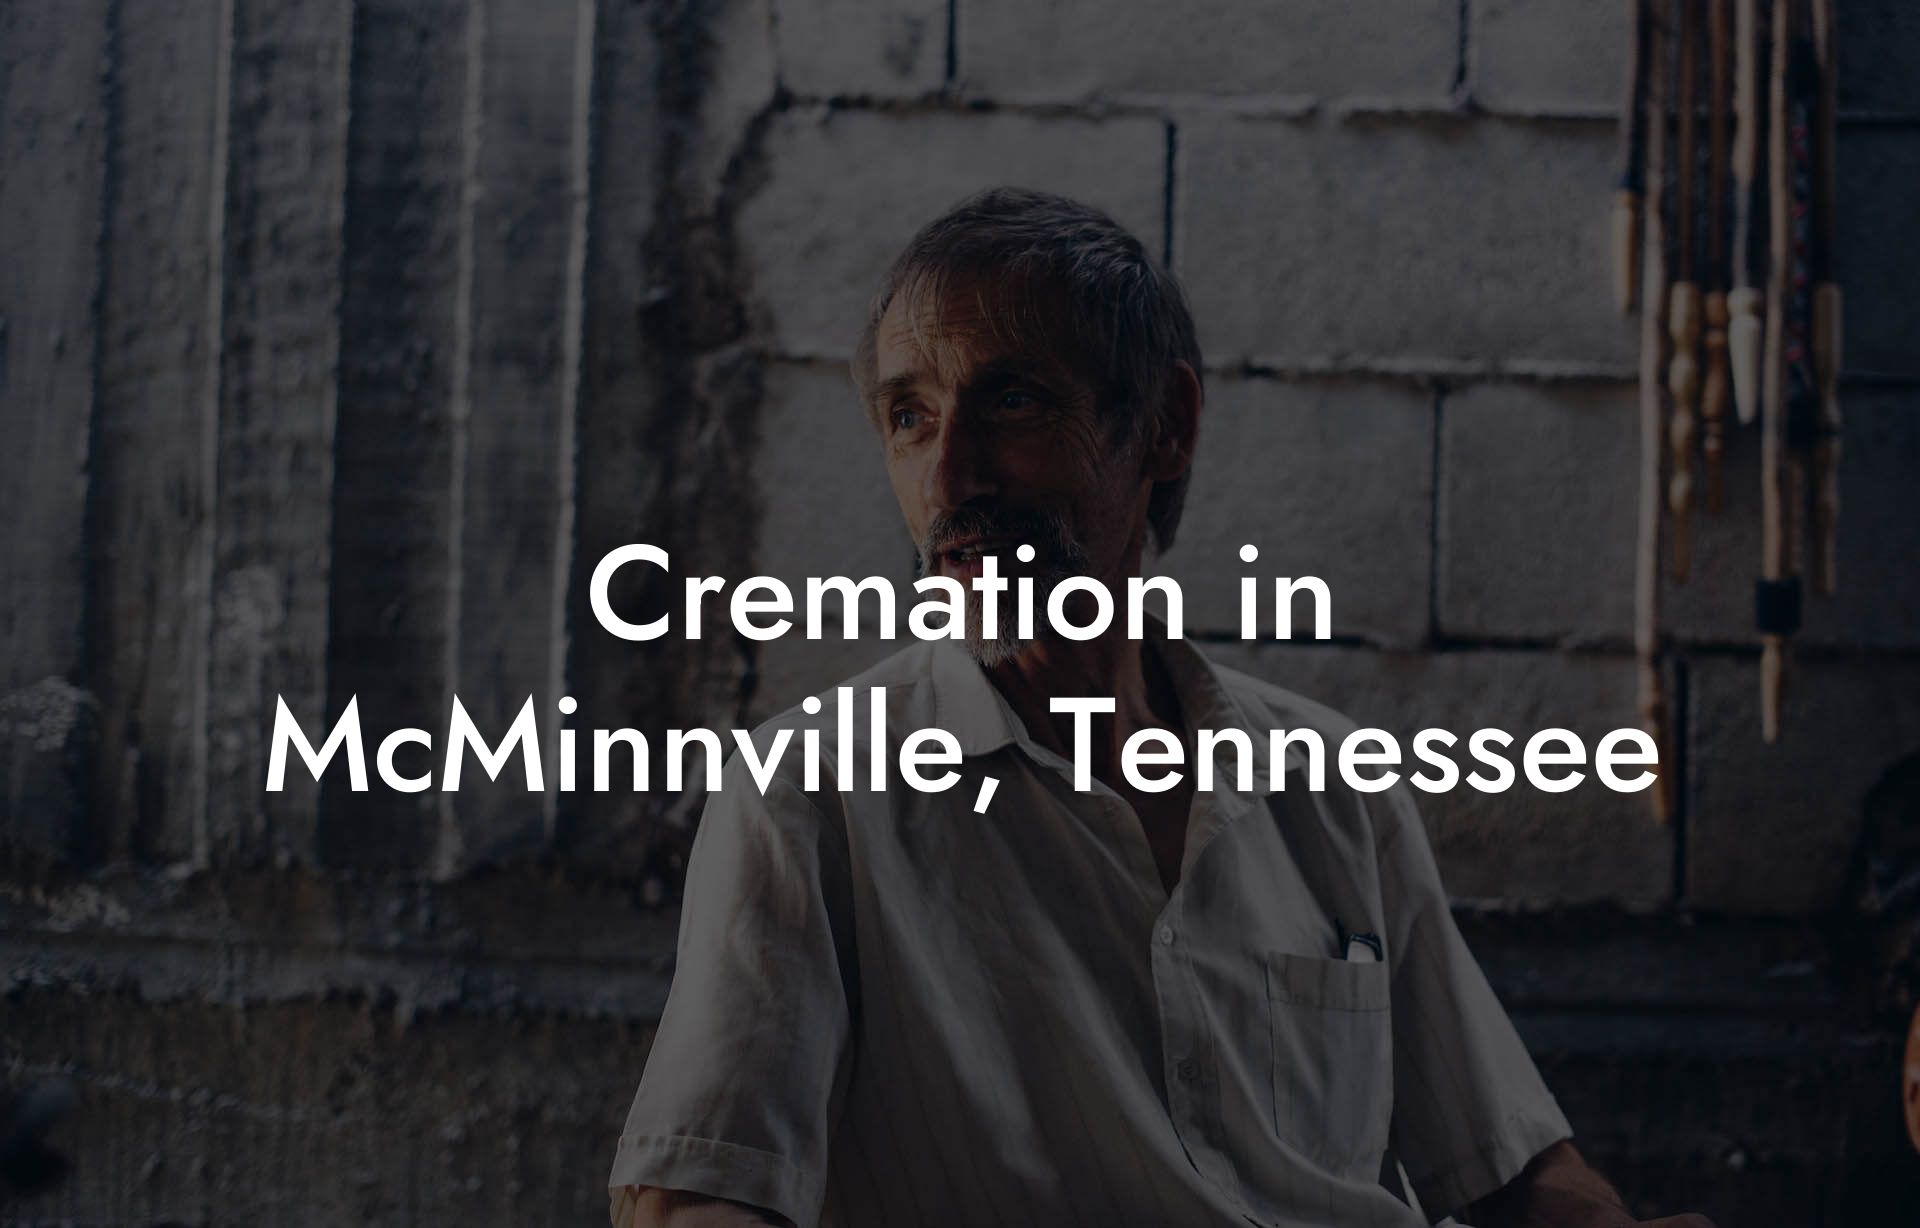 Cremation in McMinnville, Tennessee